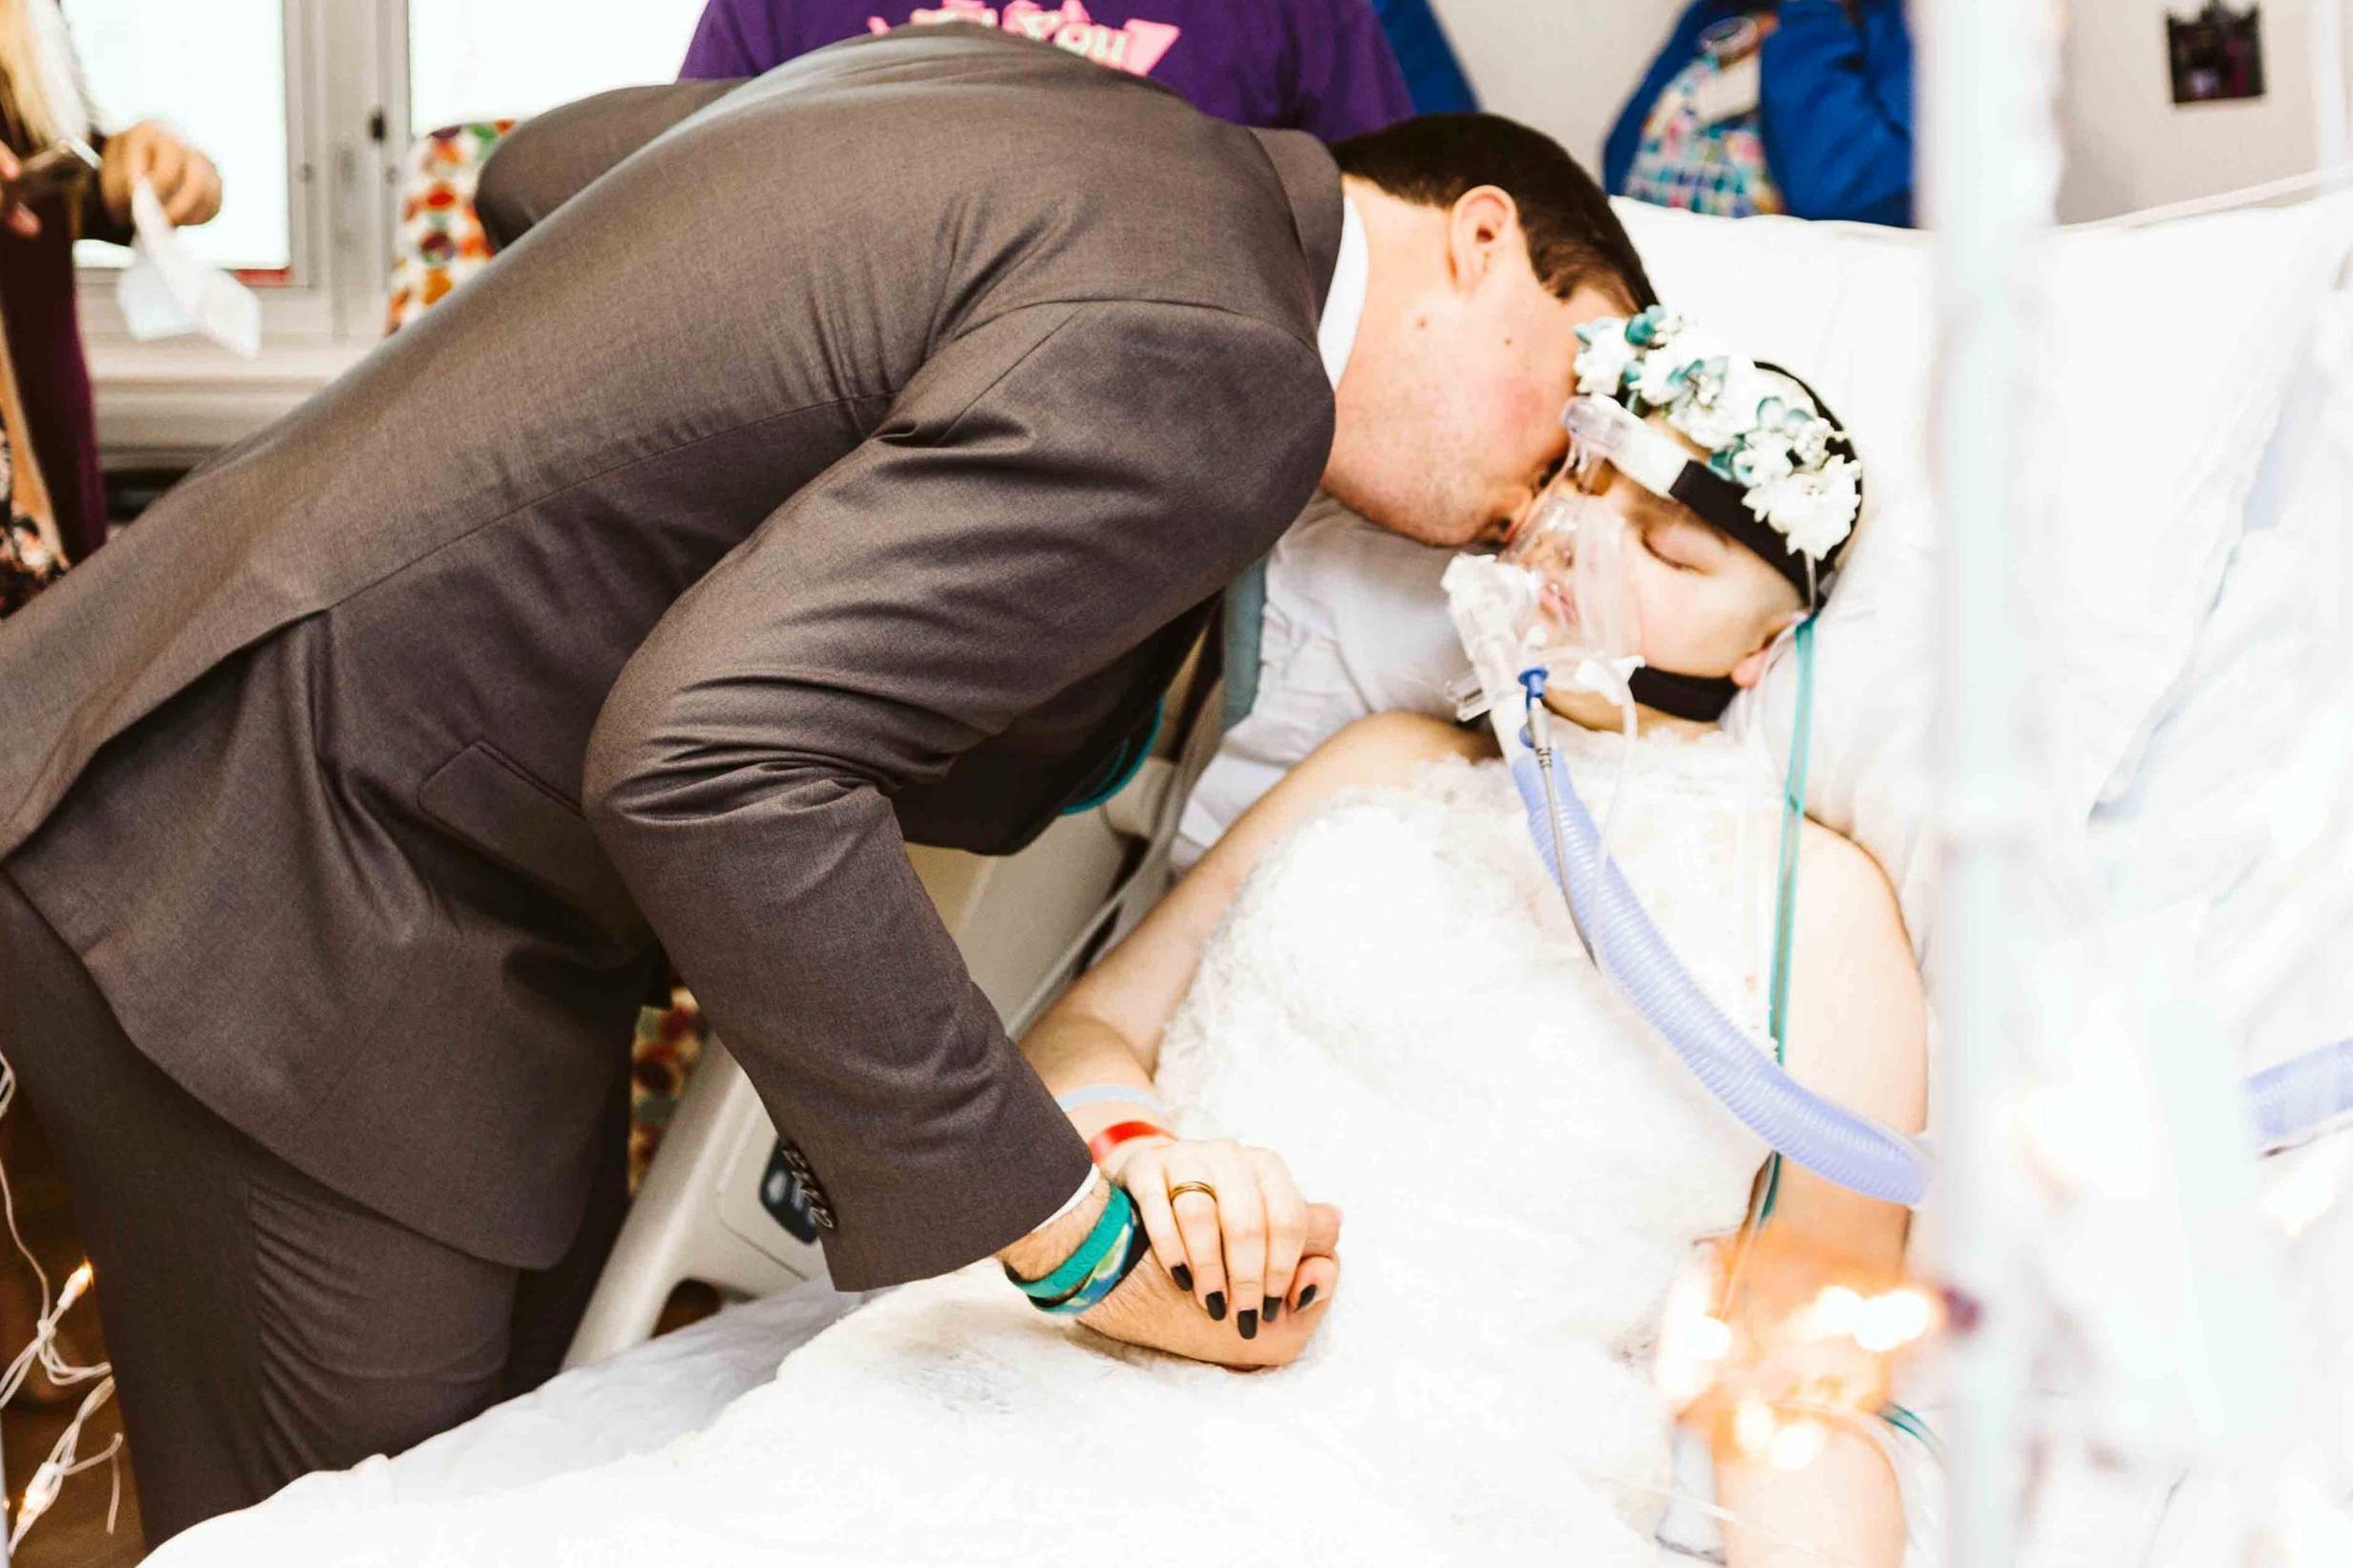 The couple married three days before the bride passed away (SWNS)